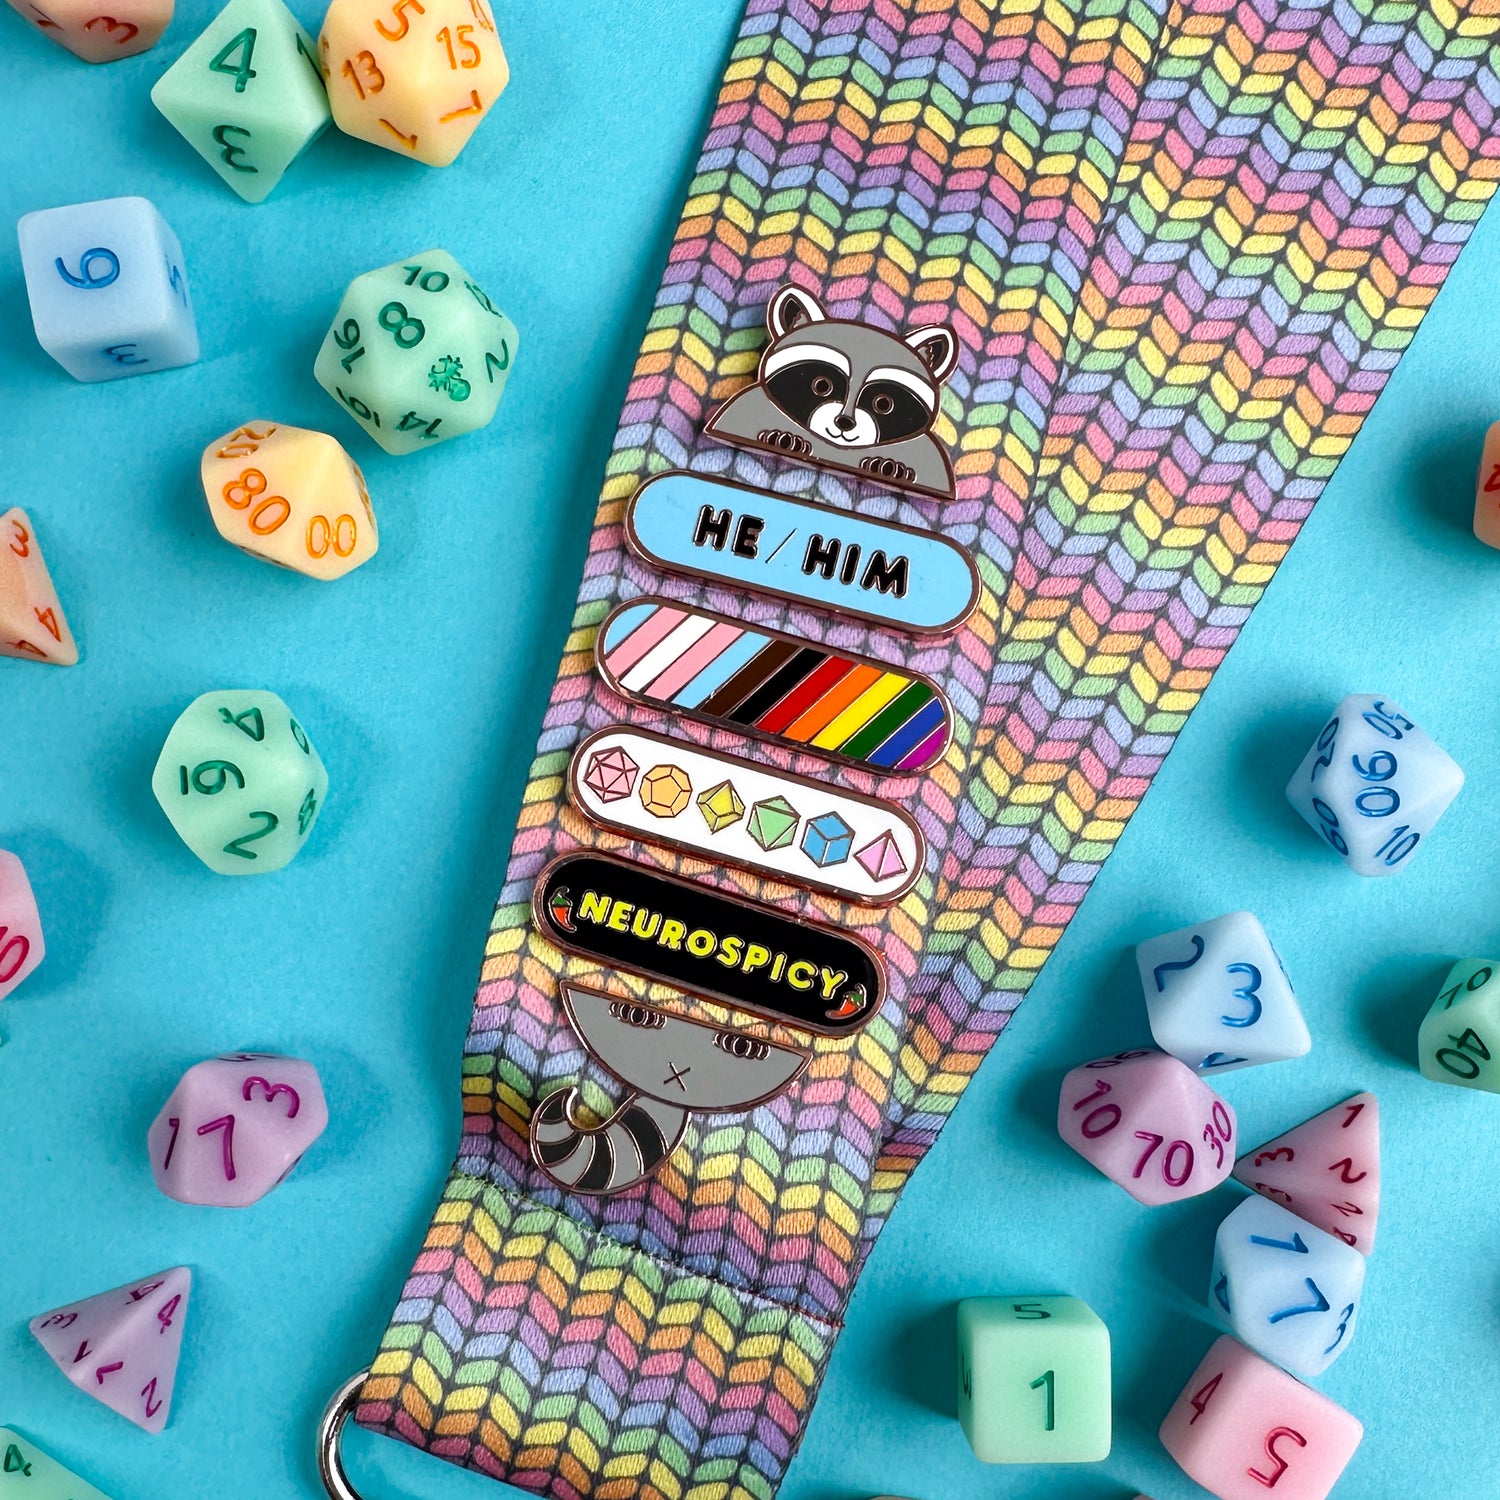 A lanyard with a pastel knit rainbow pattern on it with pins attached to it, there is a raccoon head at the top and his tail at the bottom so it looks like is holding several plaque pins including "He/Him" on a blue background, a pin striped with the colors of the progress pride flag, a pin with pastel rainbow polyhedral dice on it, and a pin that reads "neuronspicy" with peppers on it. There are pastel polyhedral dice around the lanyard on a blue paper background. 